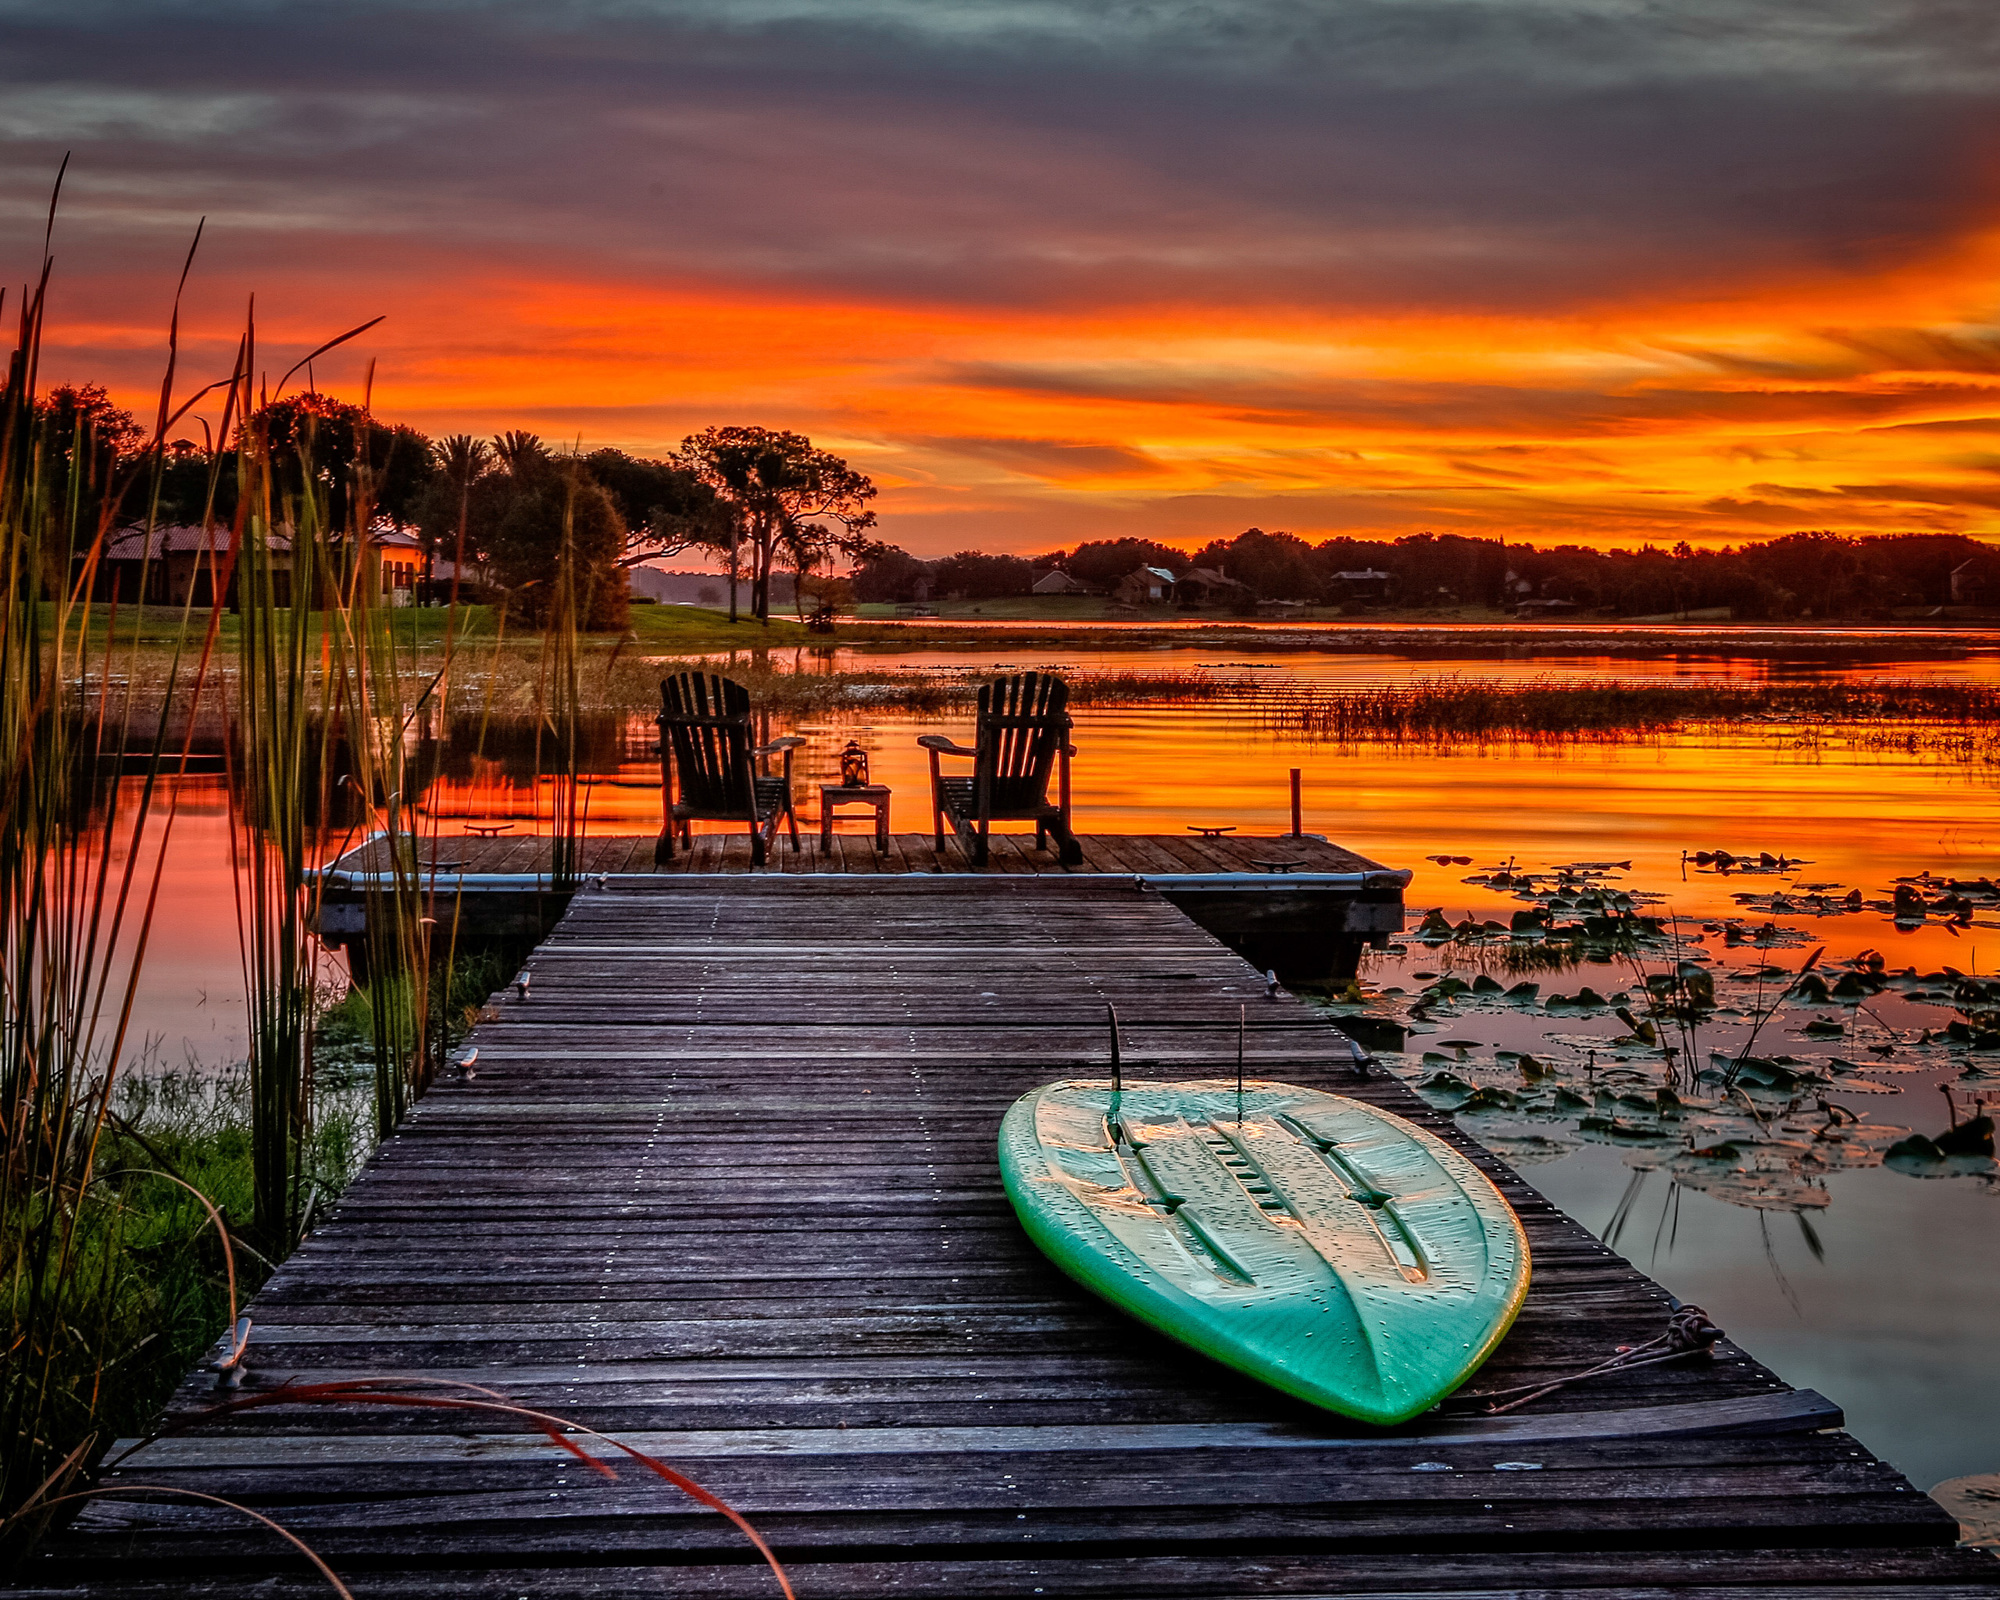 Robin Ulery captured this sunset from her Johns Lake dock. I photo by Robin Ulery